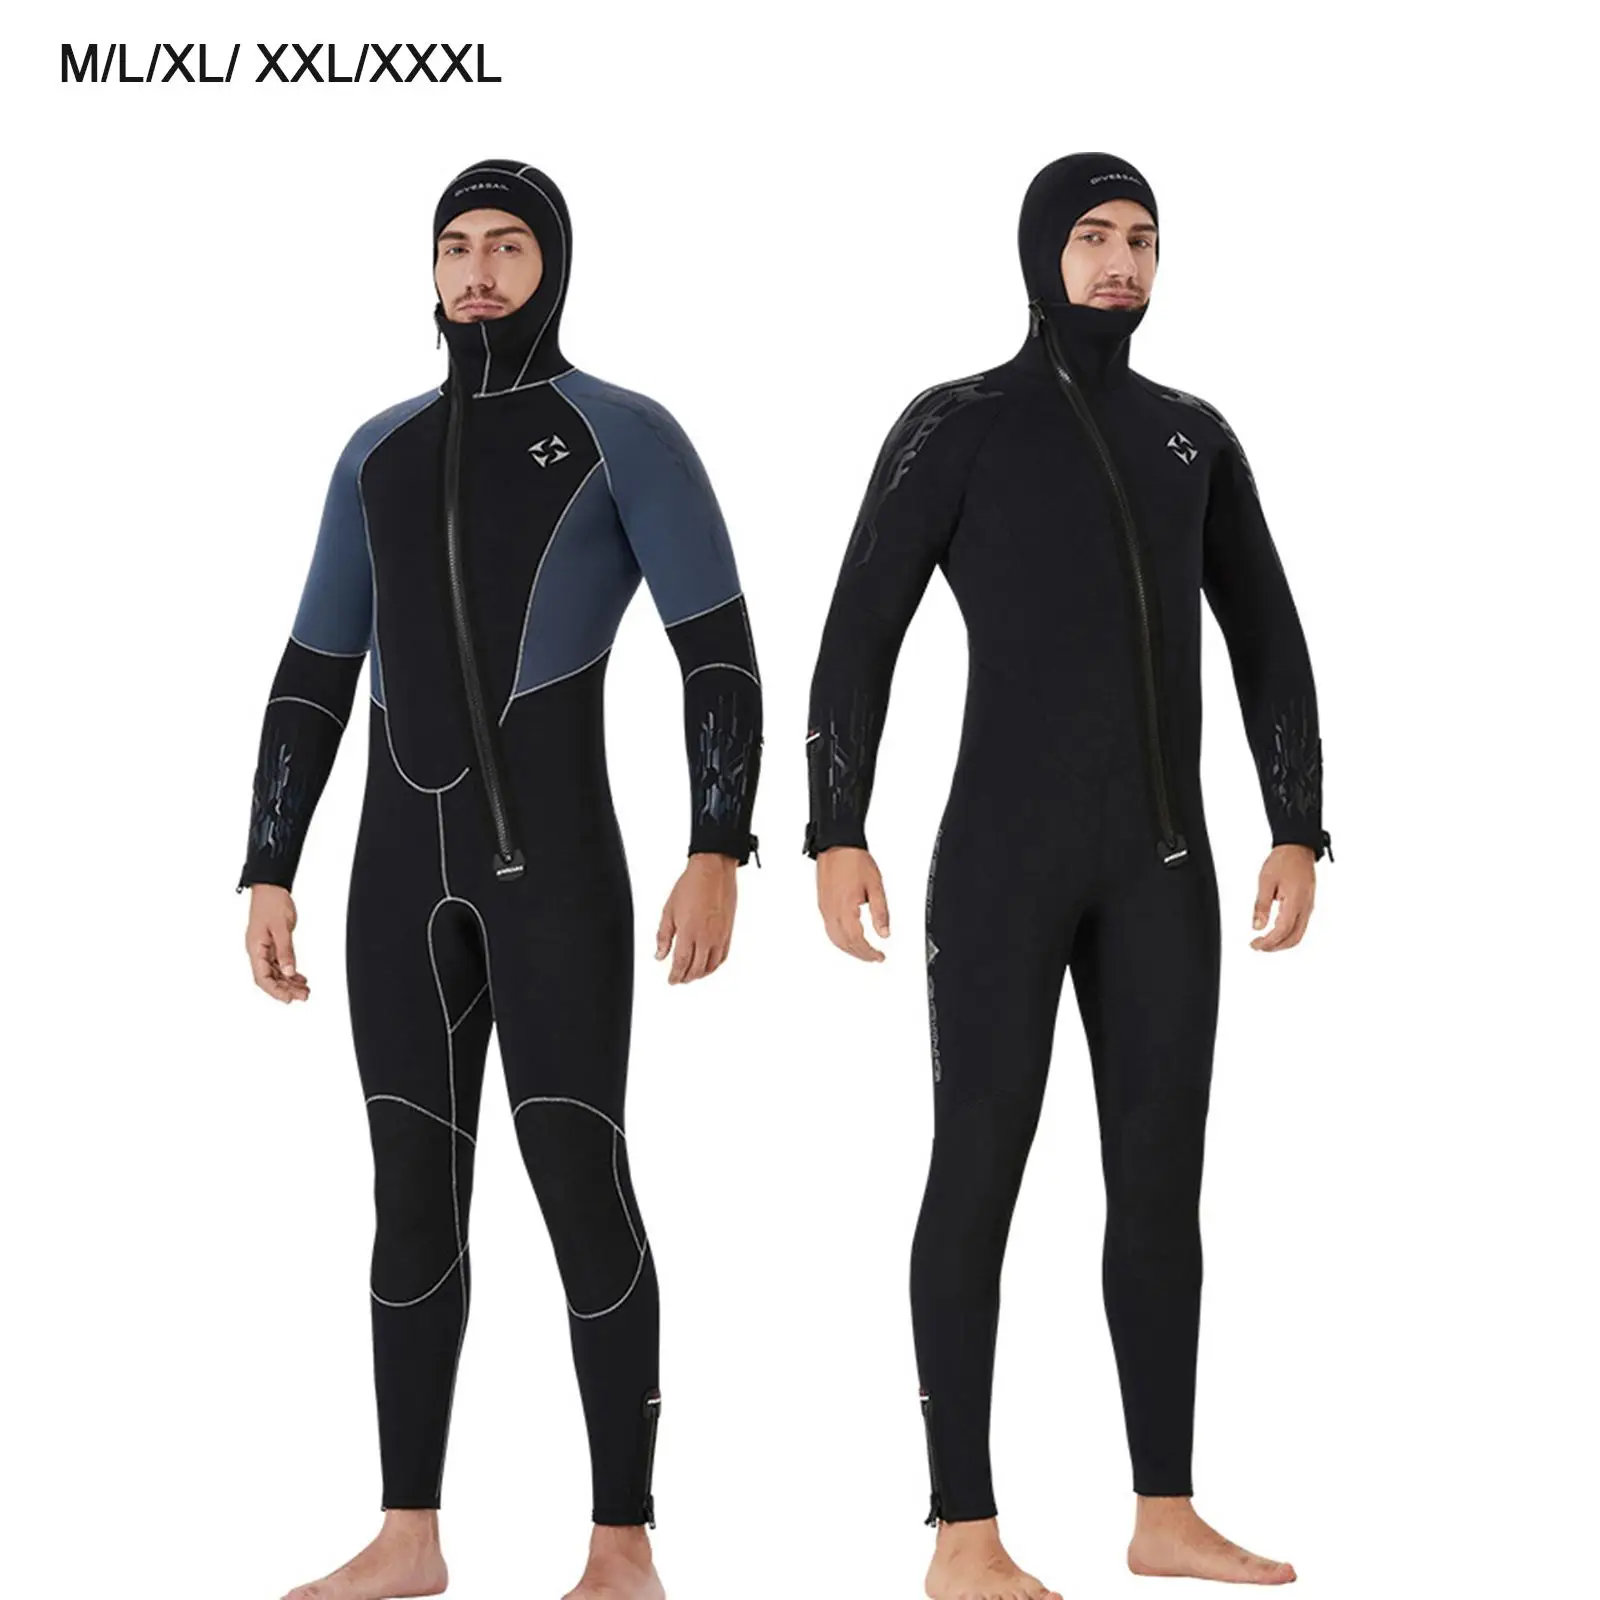 5mm Neoprene Wetsuit Full Body Diving Suit Front Zipper Wetsuit for Diving Snorkeling Surfing Swimming for Adults Men  Suit